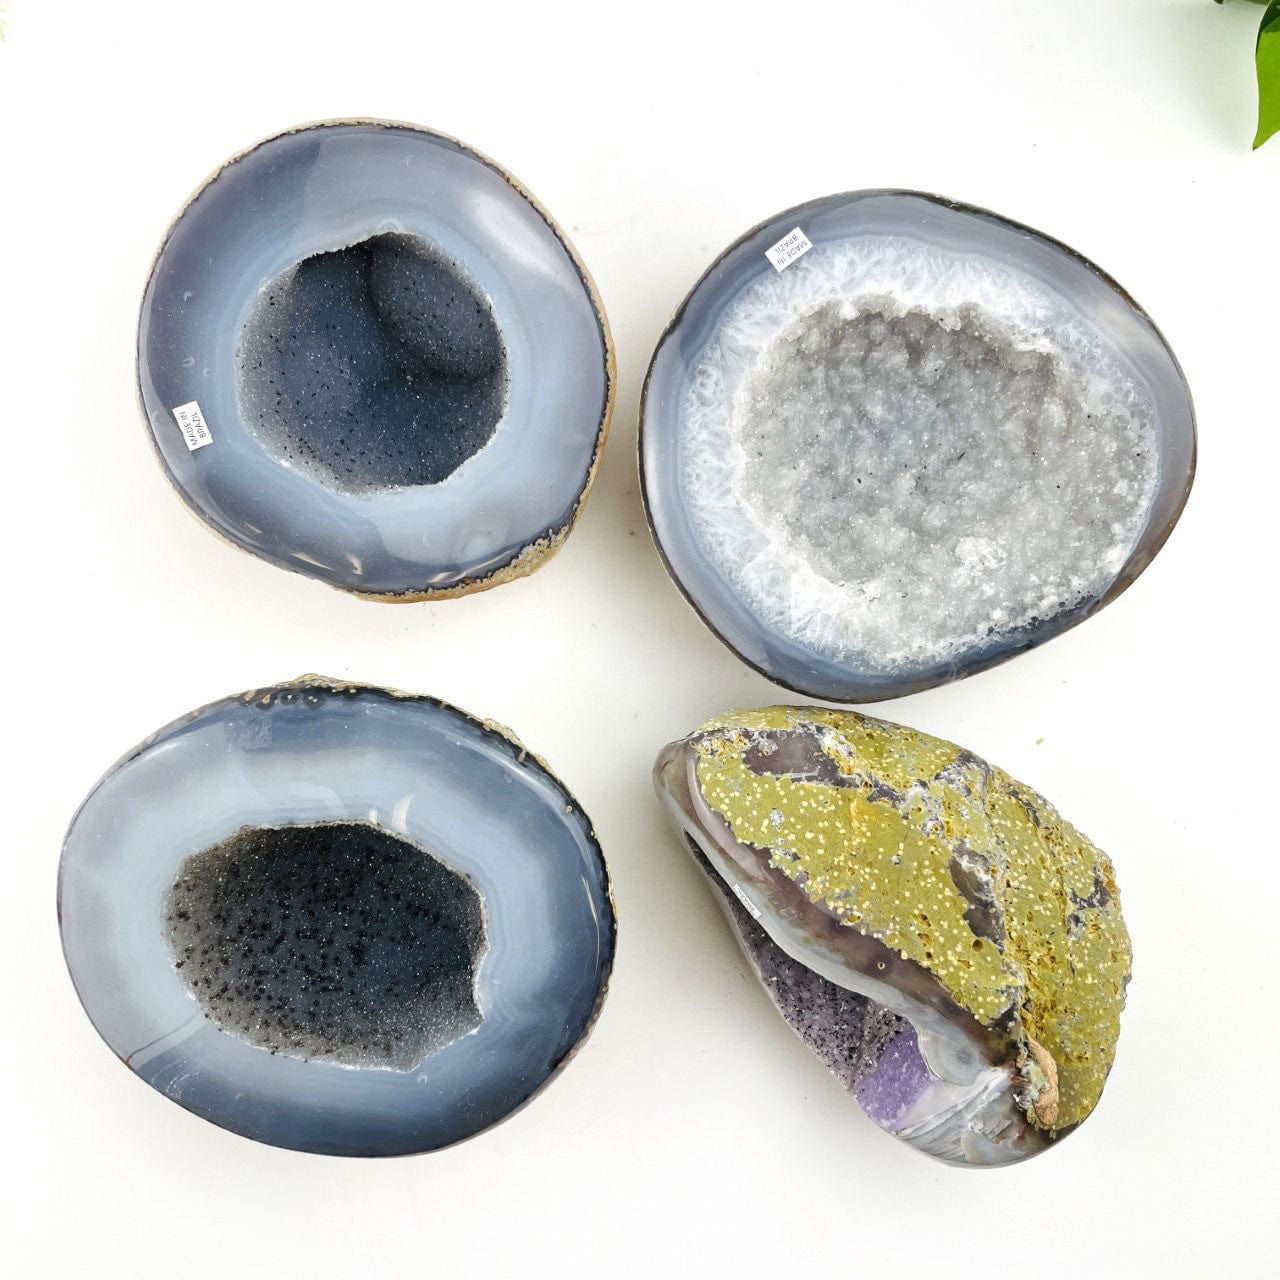 4 Agate Geodes with Druzy Centers on a table shot from overhead